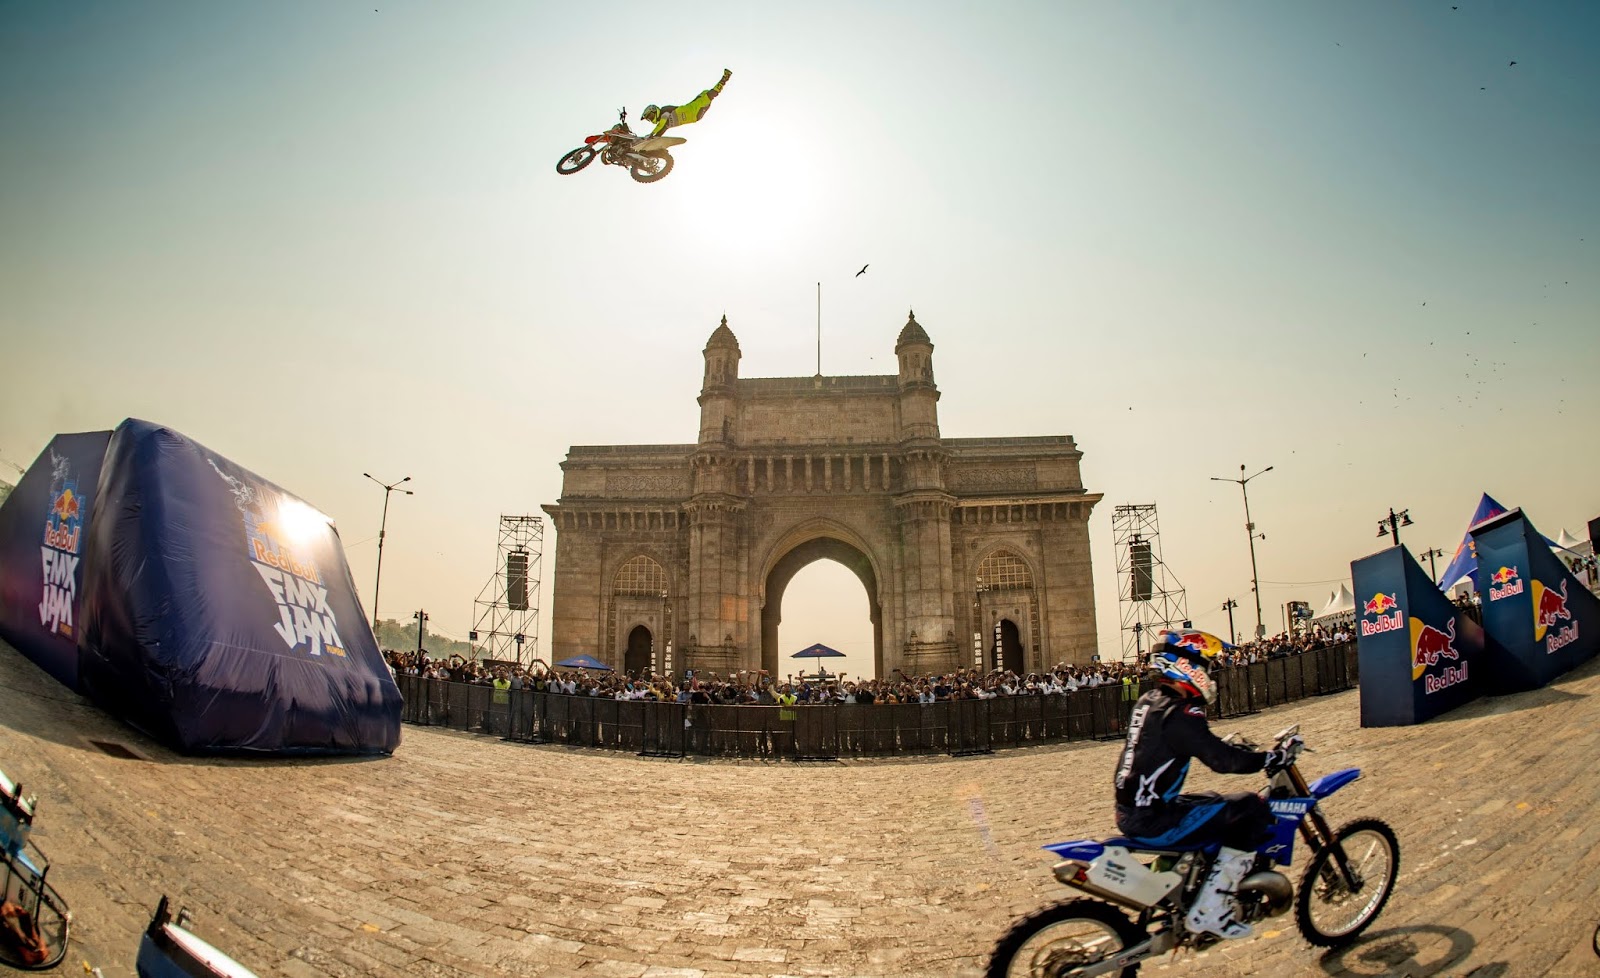 FMX  Red Bull